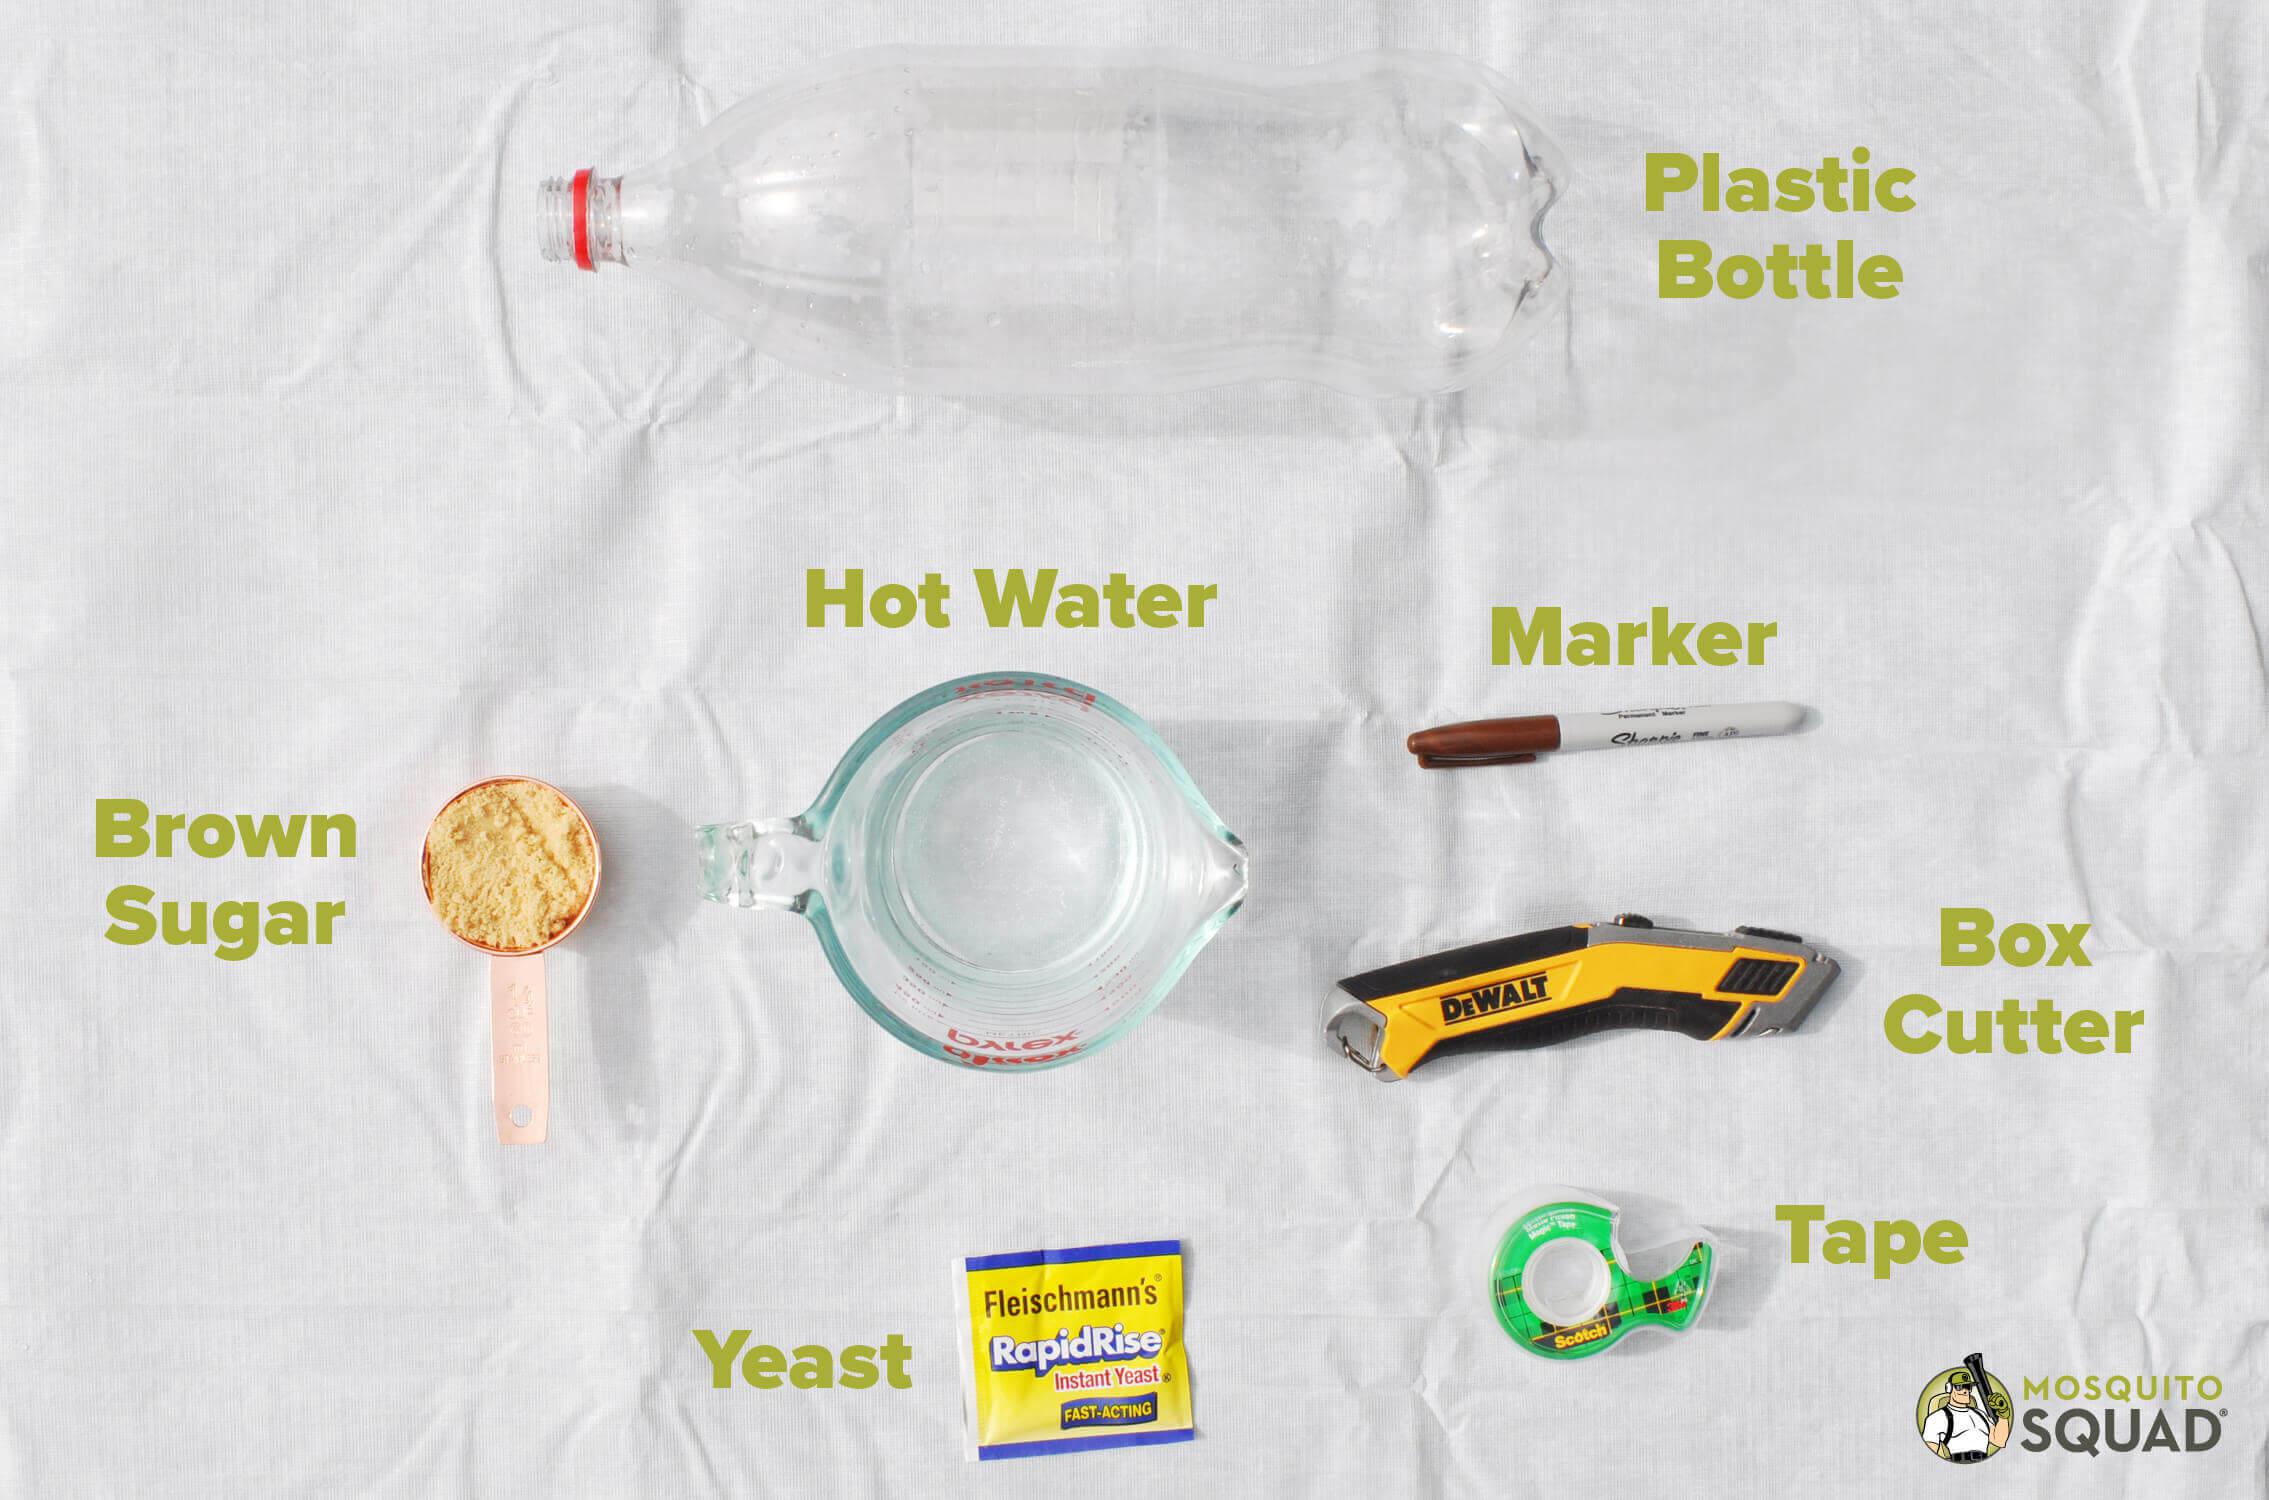 a plastic bottle, brown sugar, active yeast, box cutters, and a marker for a DIY mosquito trap